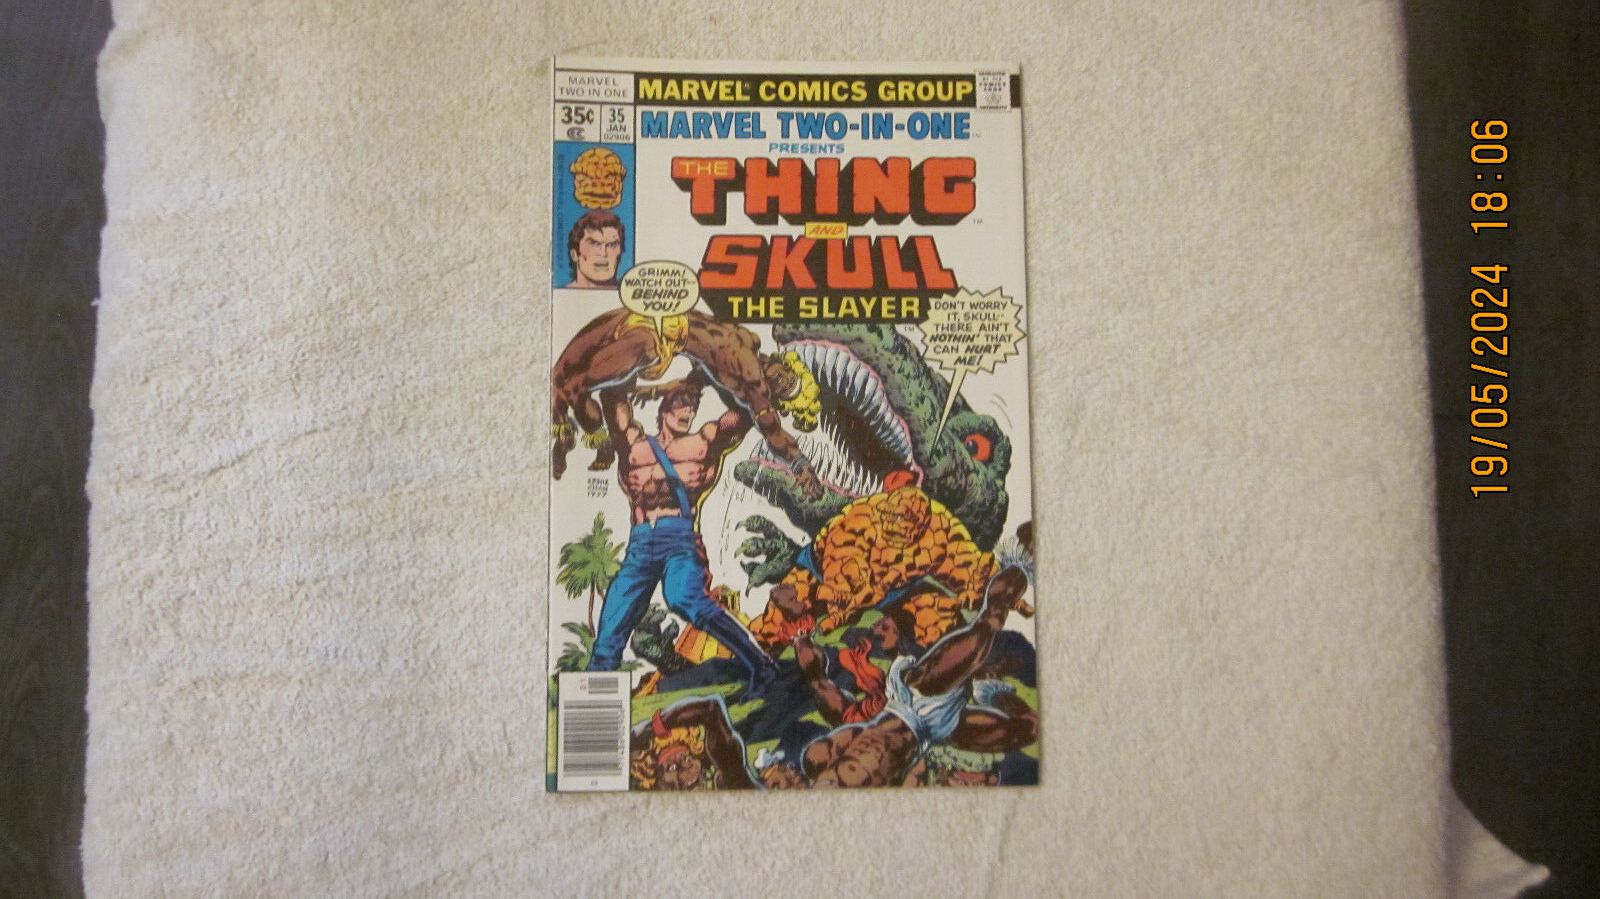 VINTAGE MARVEL COMICS MARVEL TWO-IN-ONE #35 THE THING AND SKRULL THE SLAYER NM-